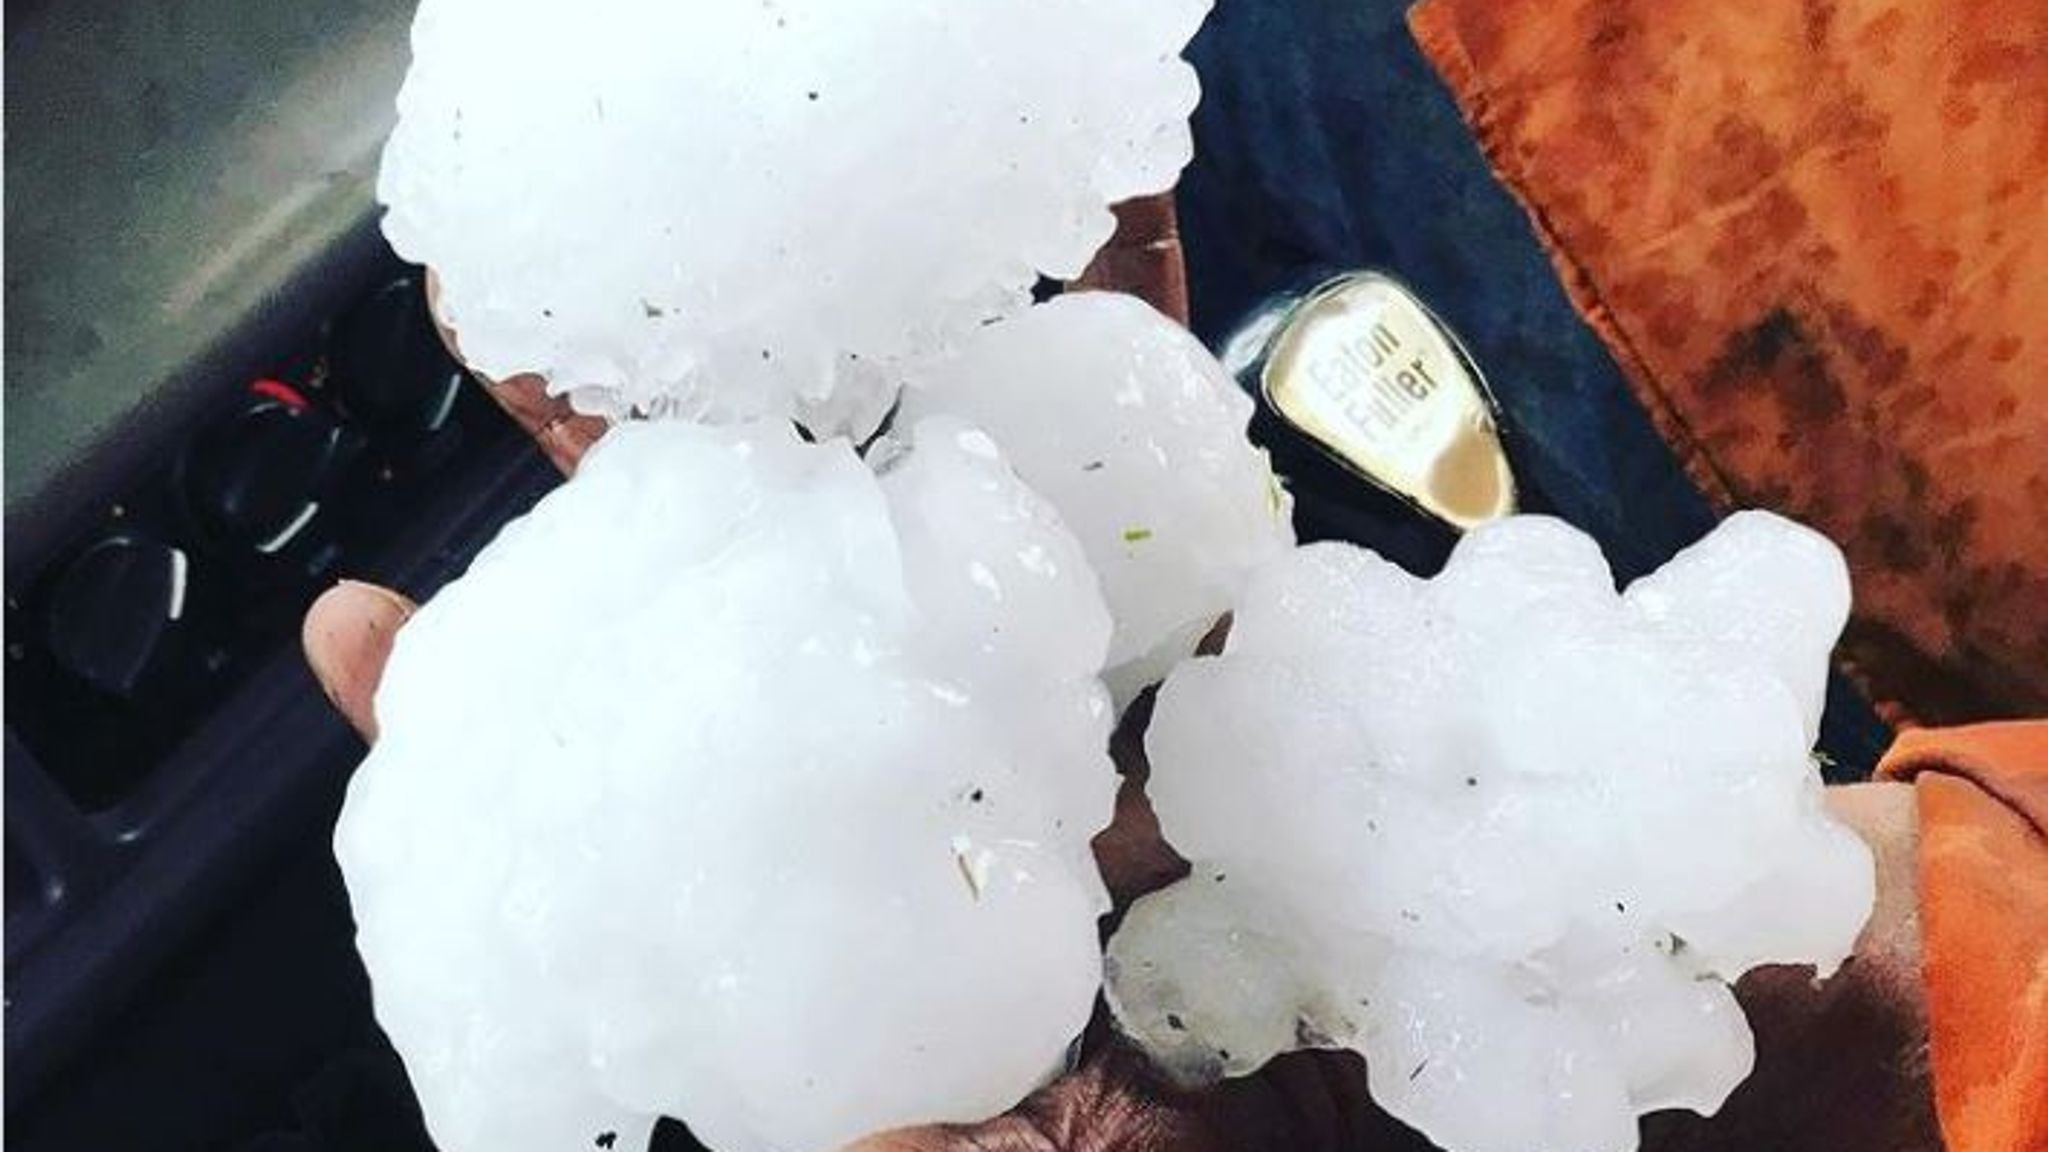 The huge hailstones that rained down on parts of Queensland, Australia